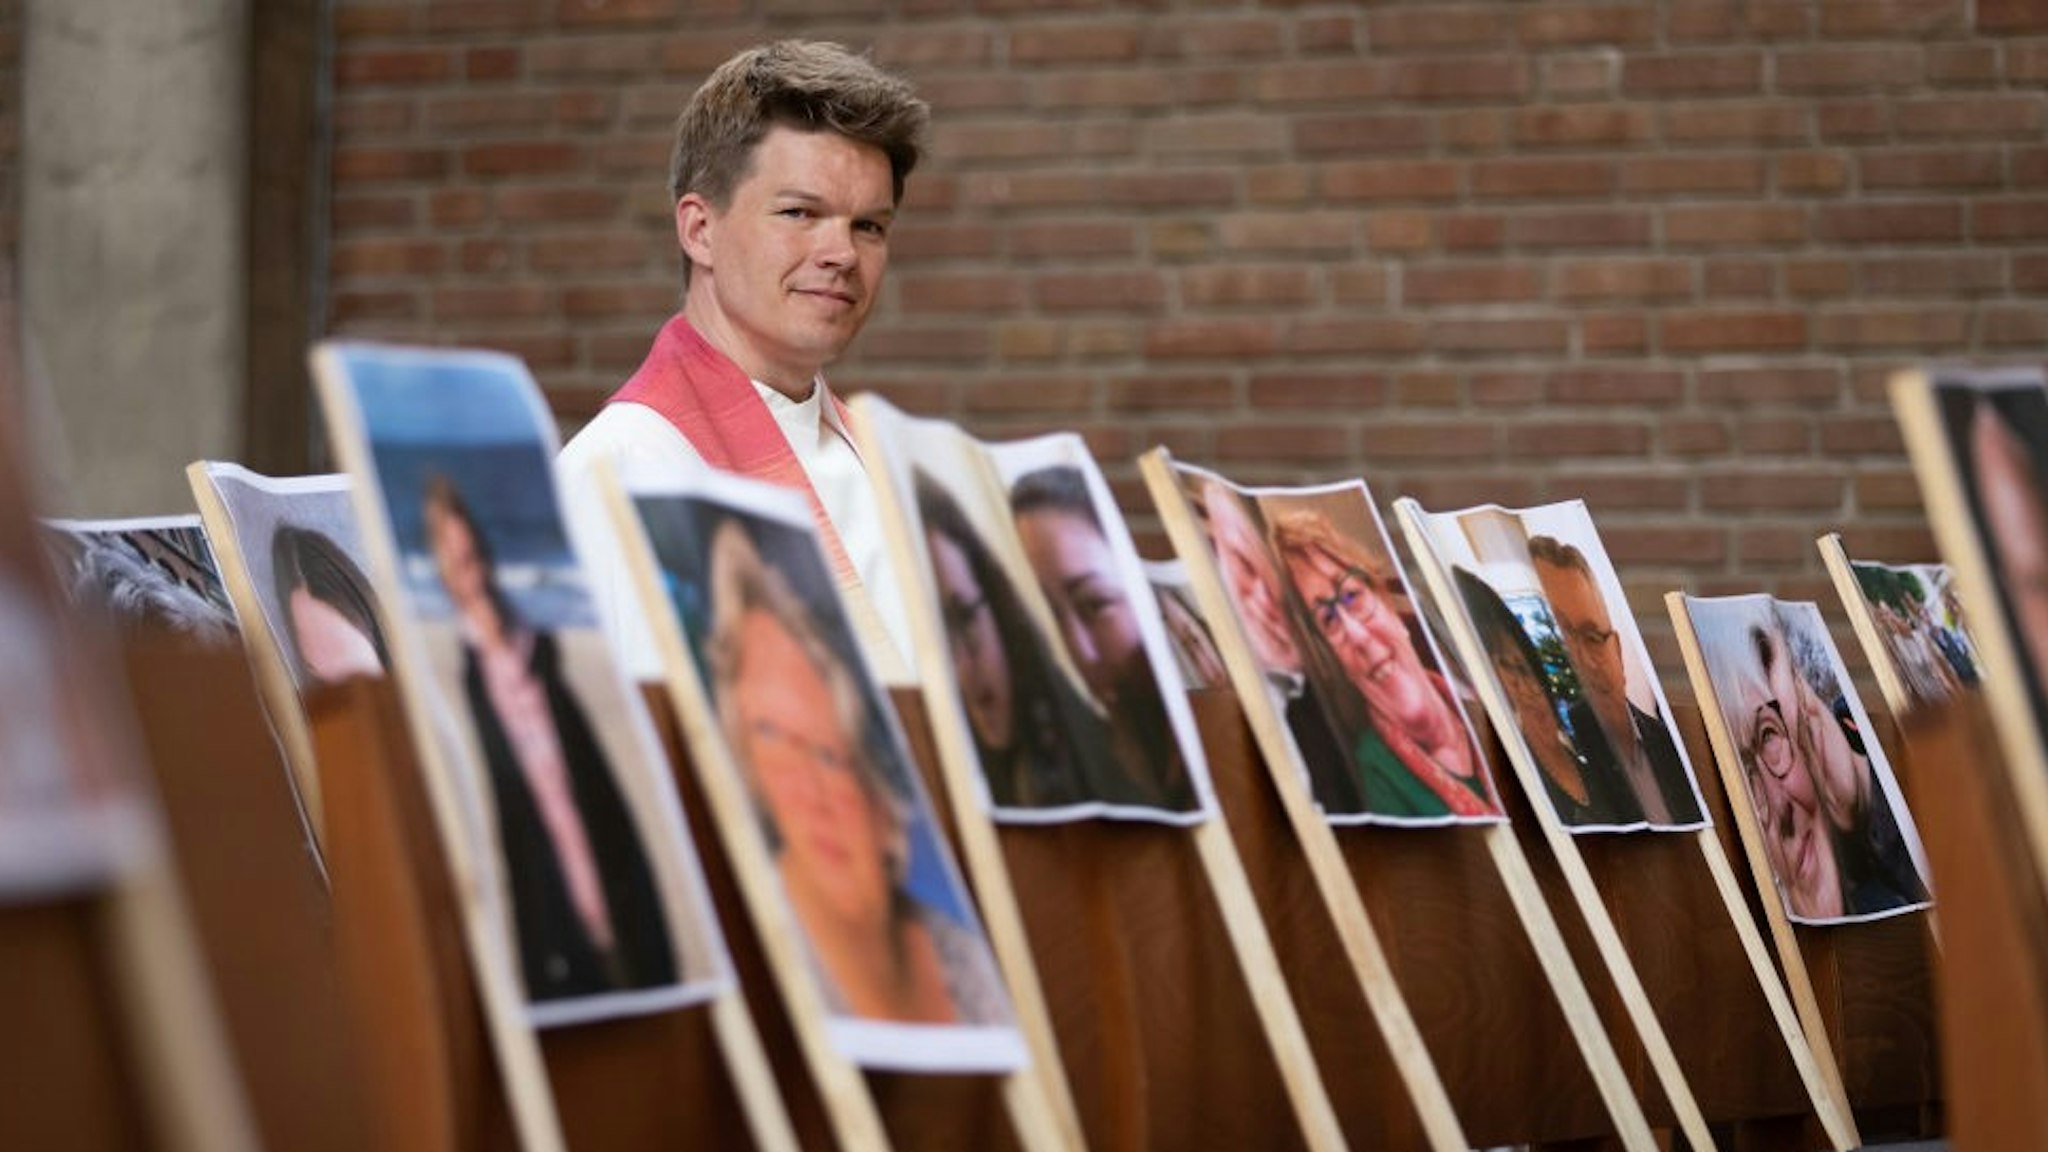 Lower Saxony, Nordhorn: Pastor Simon de Vries from the Lutheran congregation sits in the Christuskirche. In the pews there are photos of believers who are currently unable to attend church services in person because of the Corona crisis.